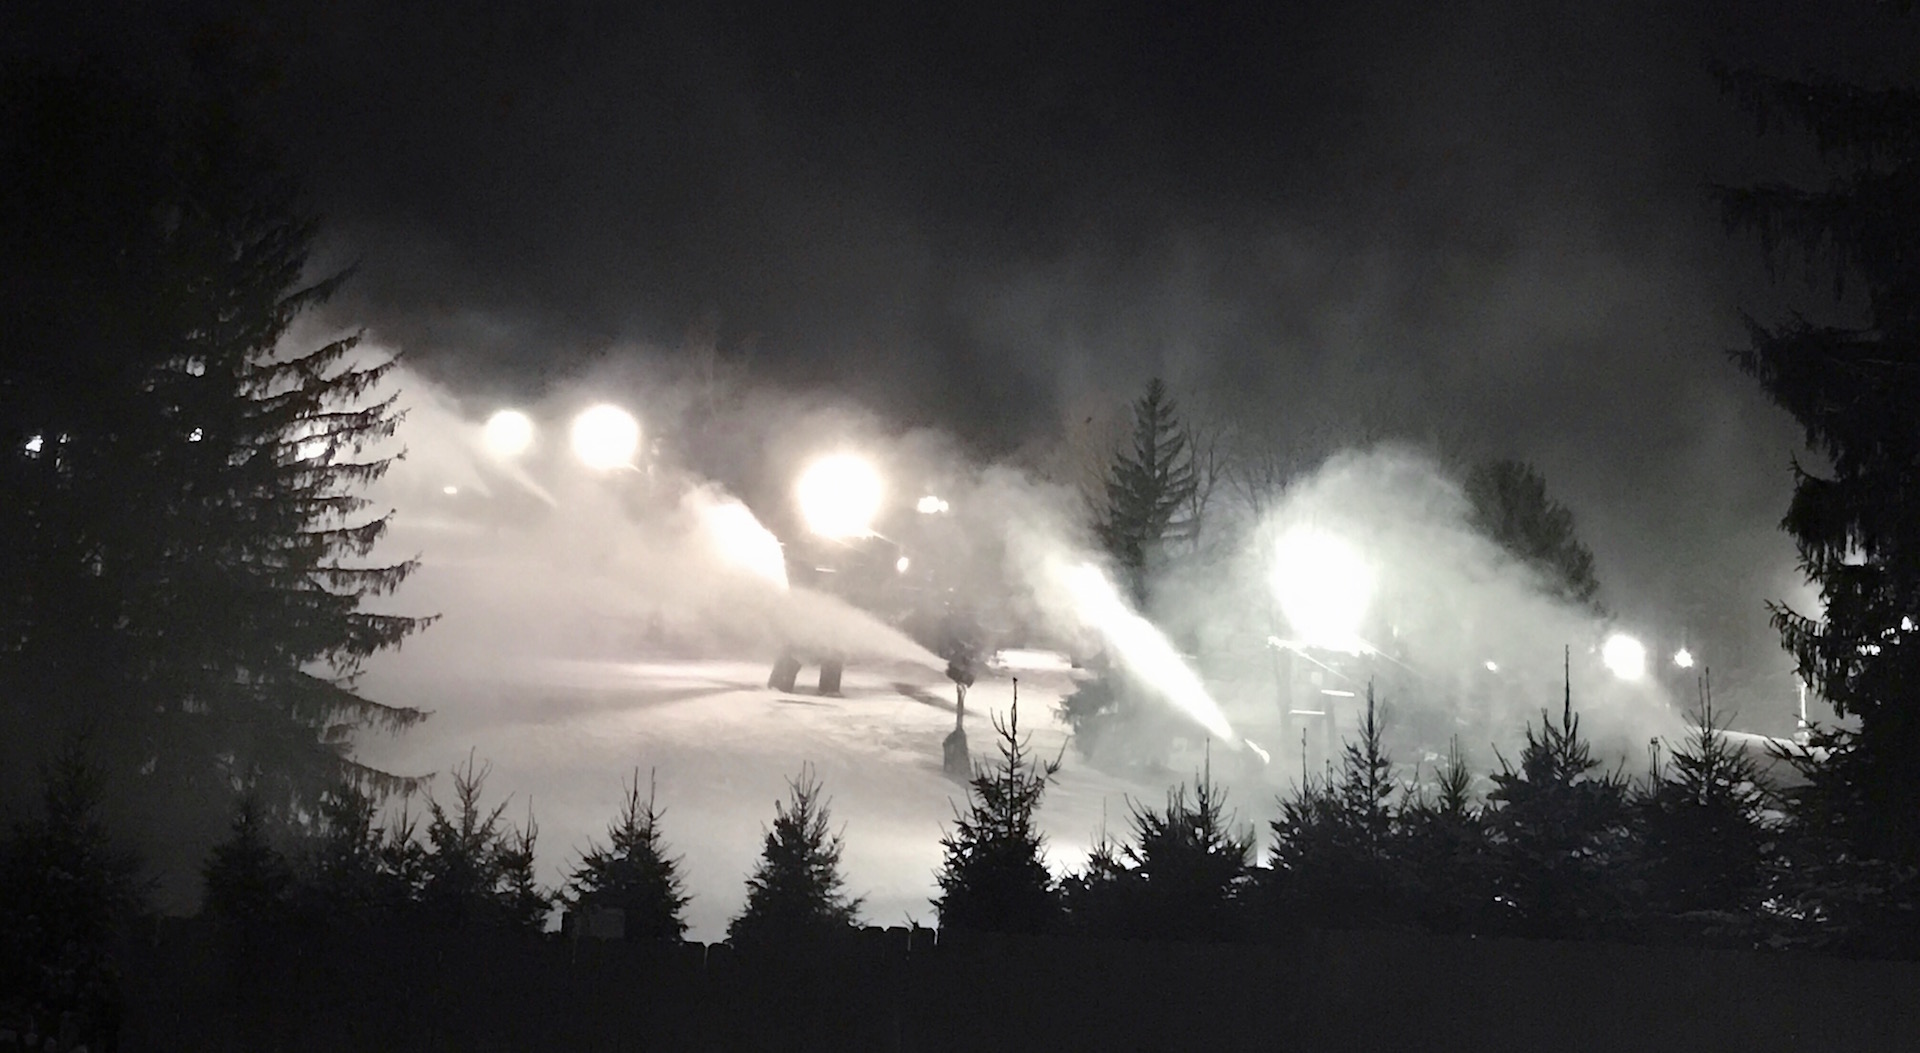 Snowmaking continues at Night on Snow Trails Competition Slope in Mansfield, Ohio